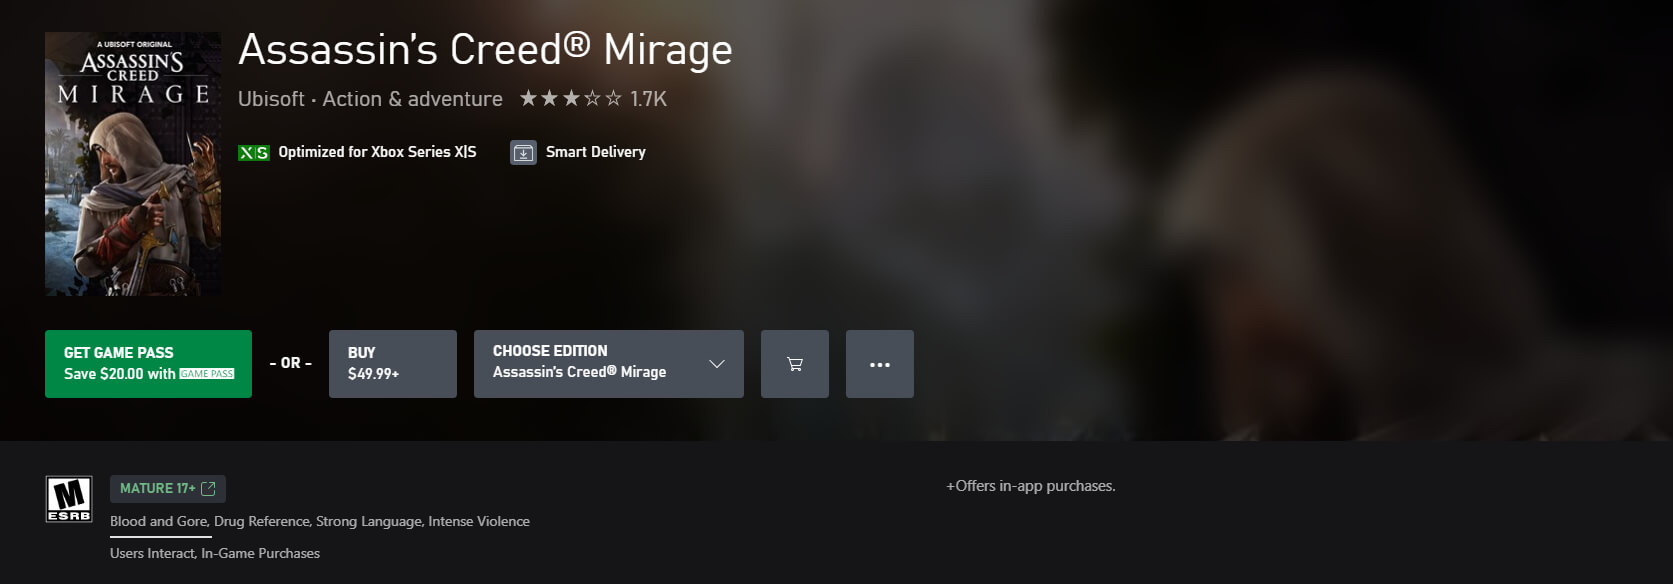 Assassin's Creed Mirage on the Xbox Store